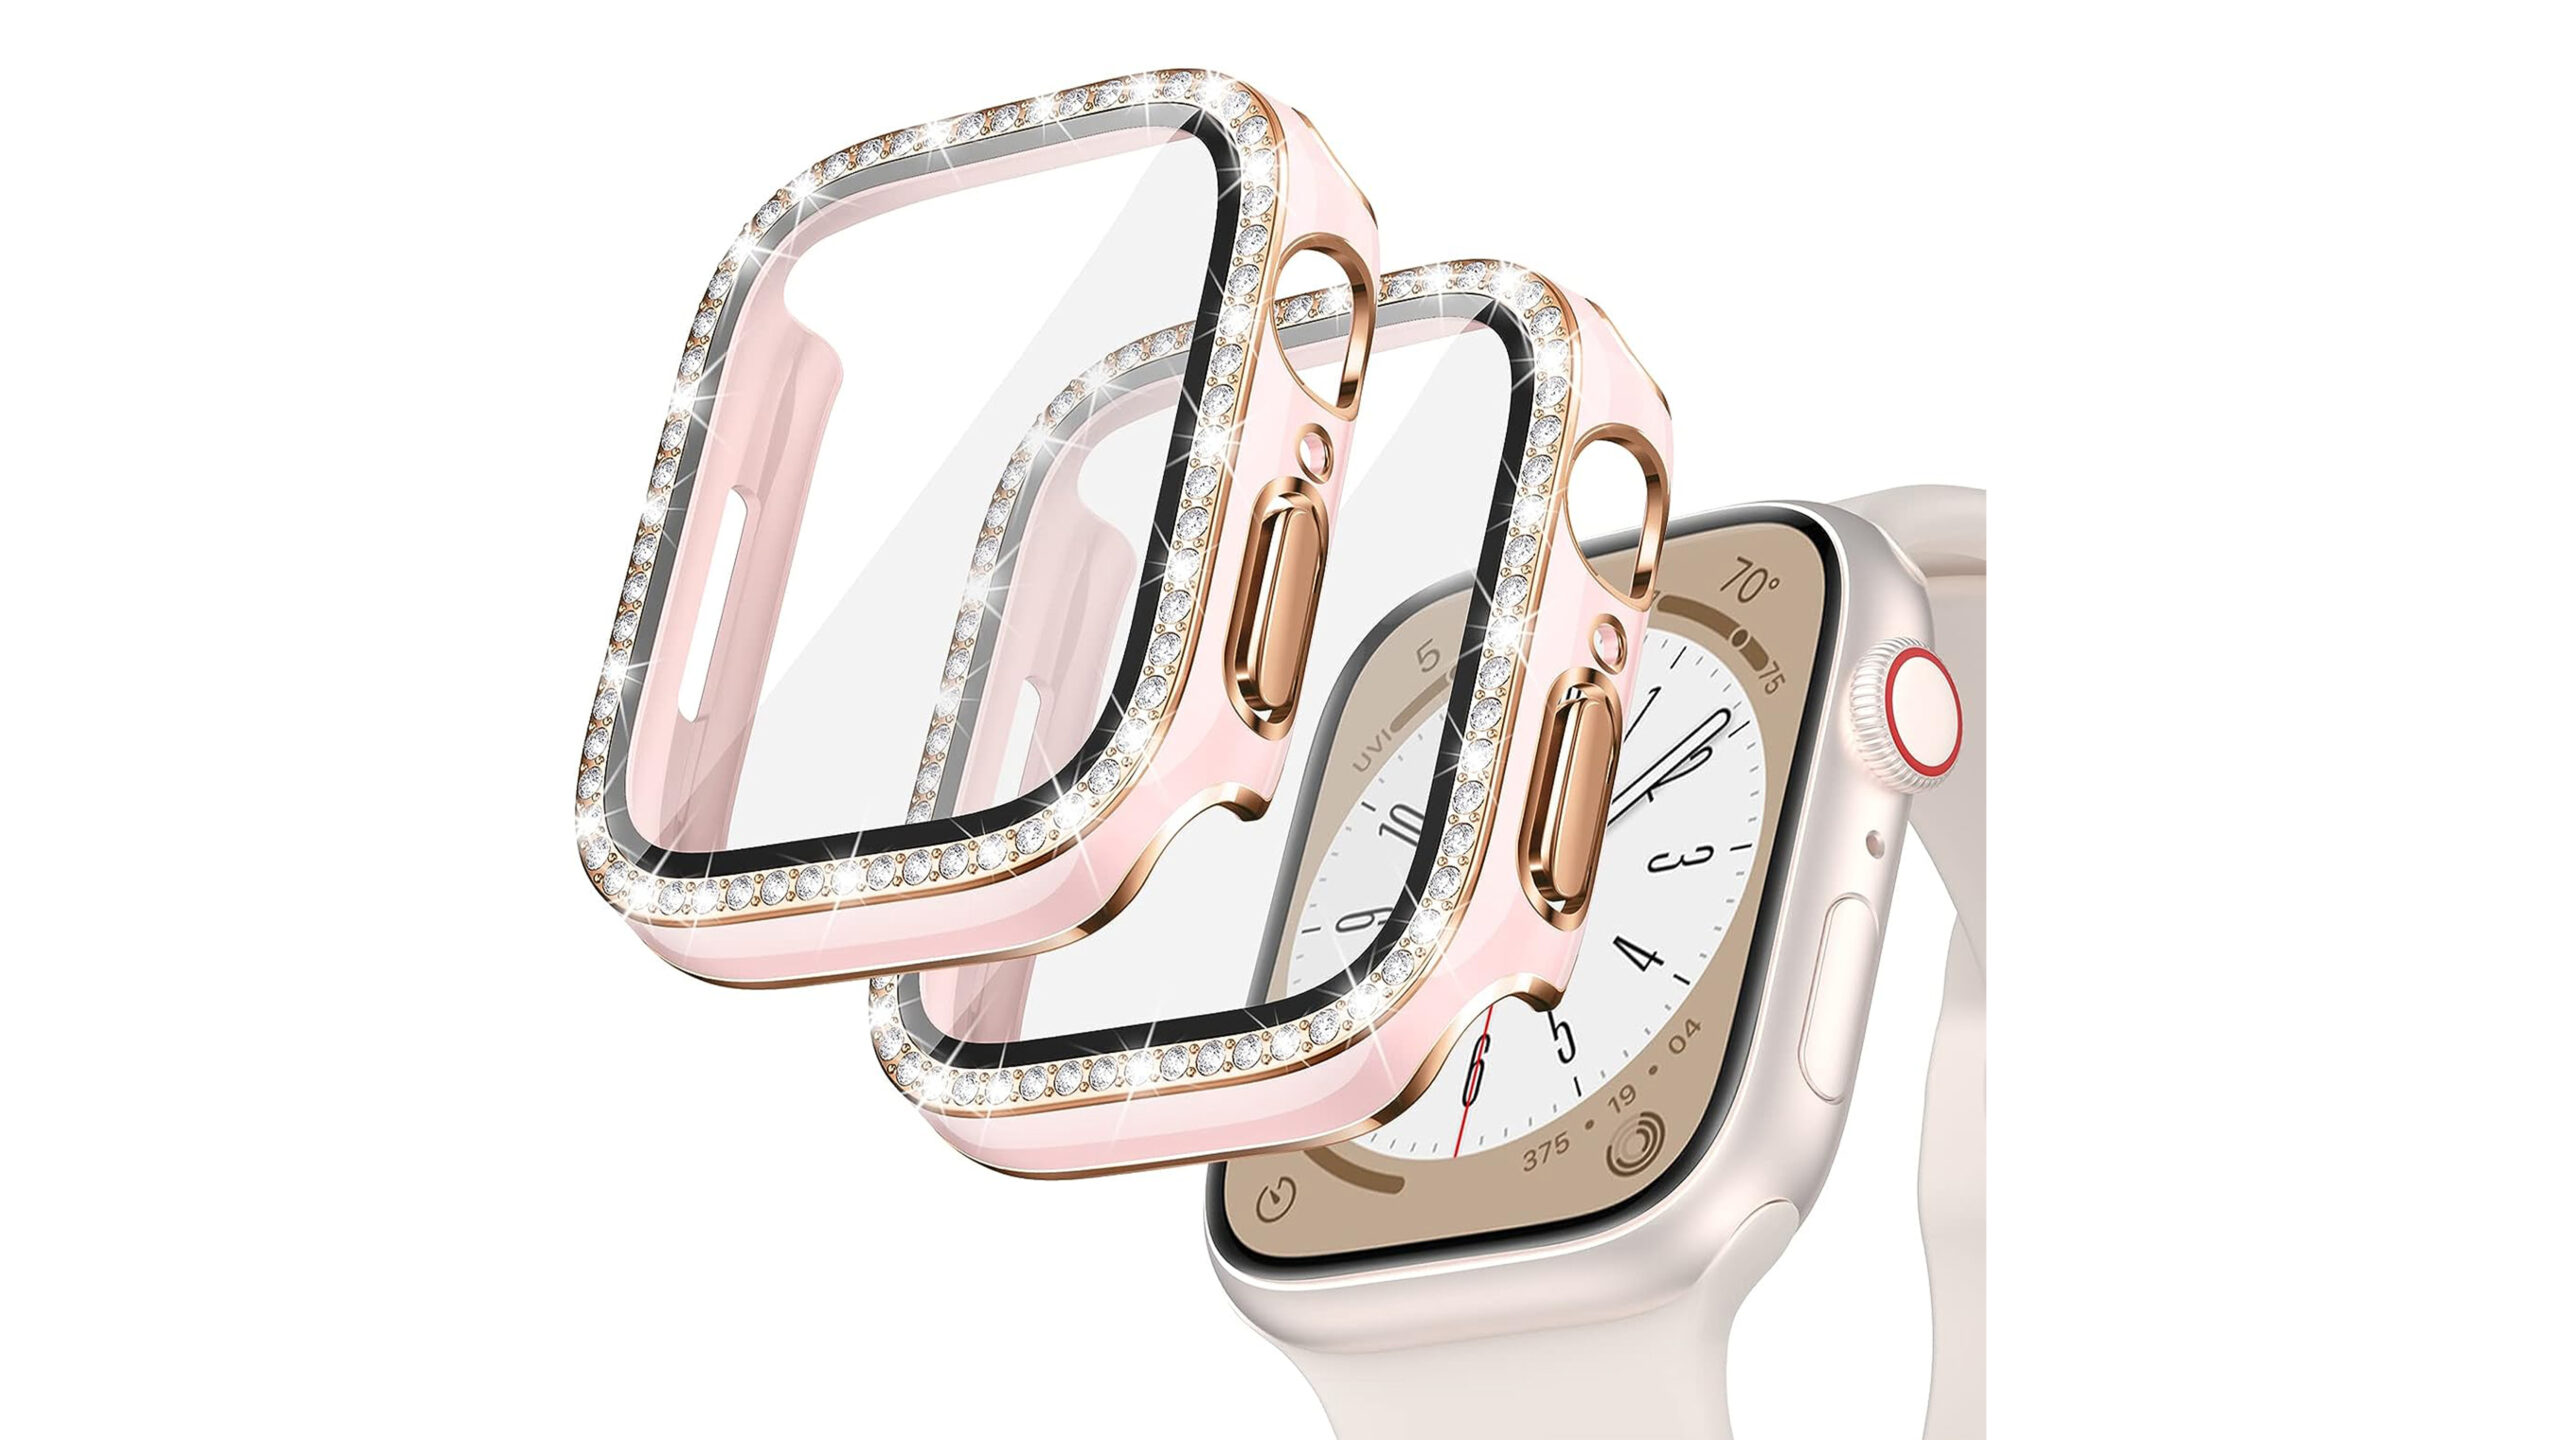 Rhinestone-adorned options from Goton are the best Apple Watch Series 9 cases for adding bling to your device.